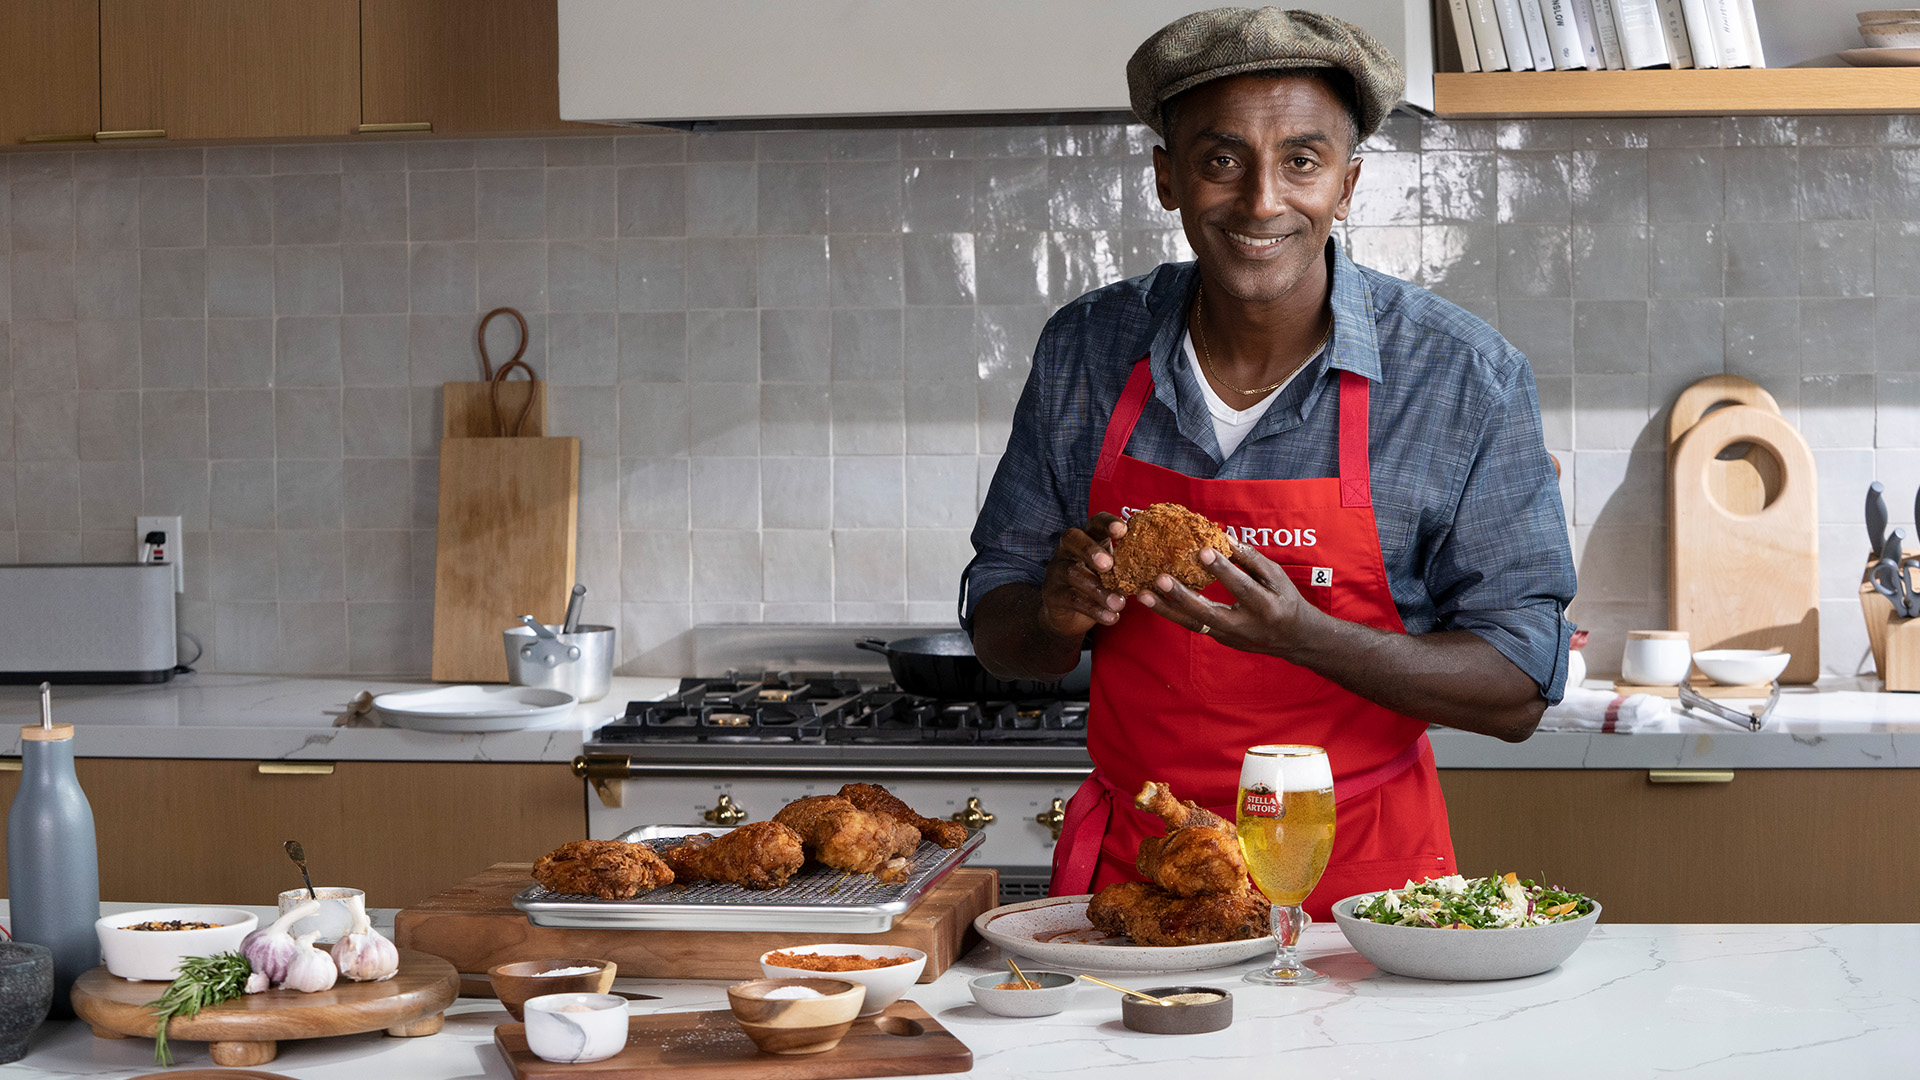 Chef Marcus Samuelsson is offering his Fried Yardbird recipe as an NFT. Photo courtesy of Stella Artois.